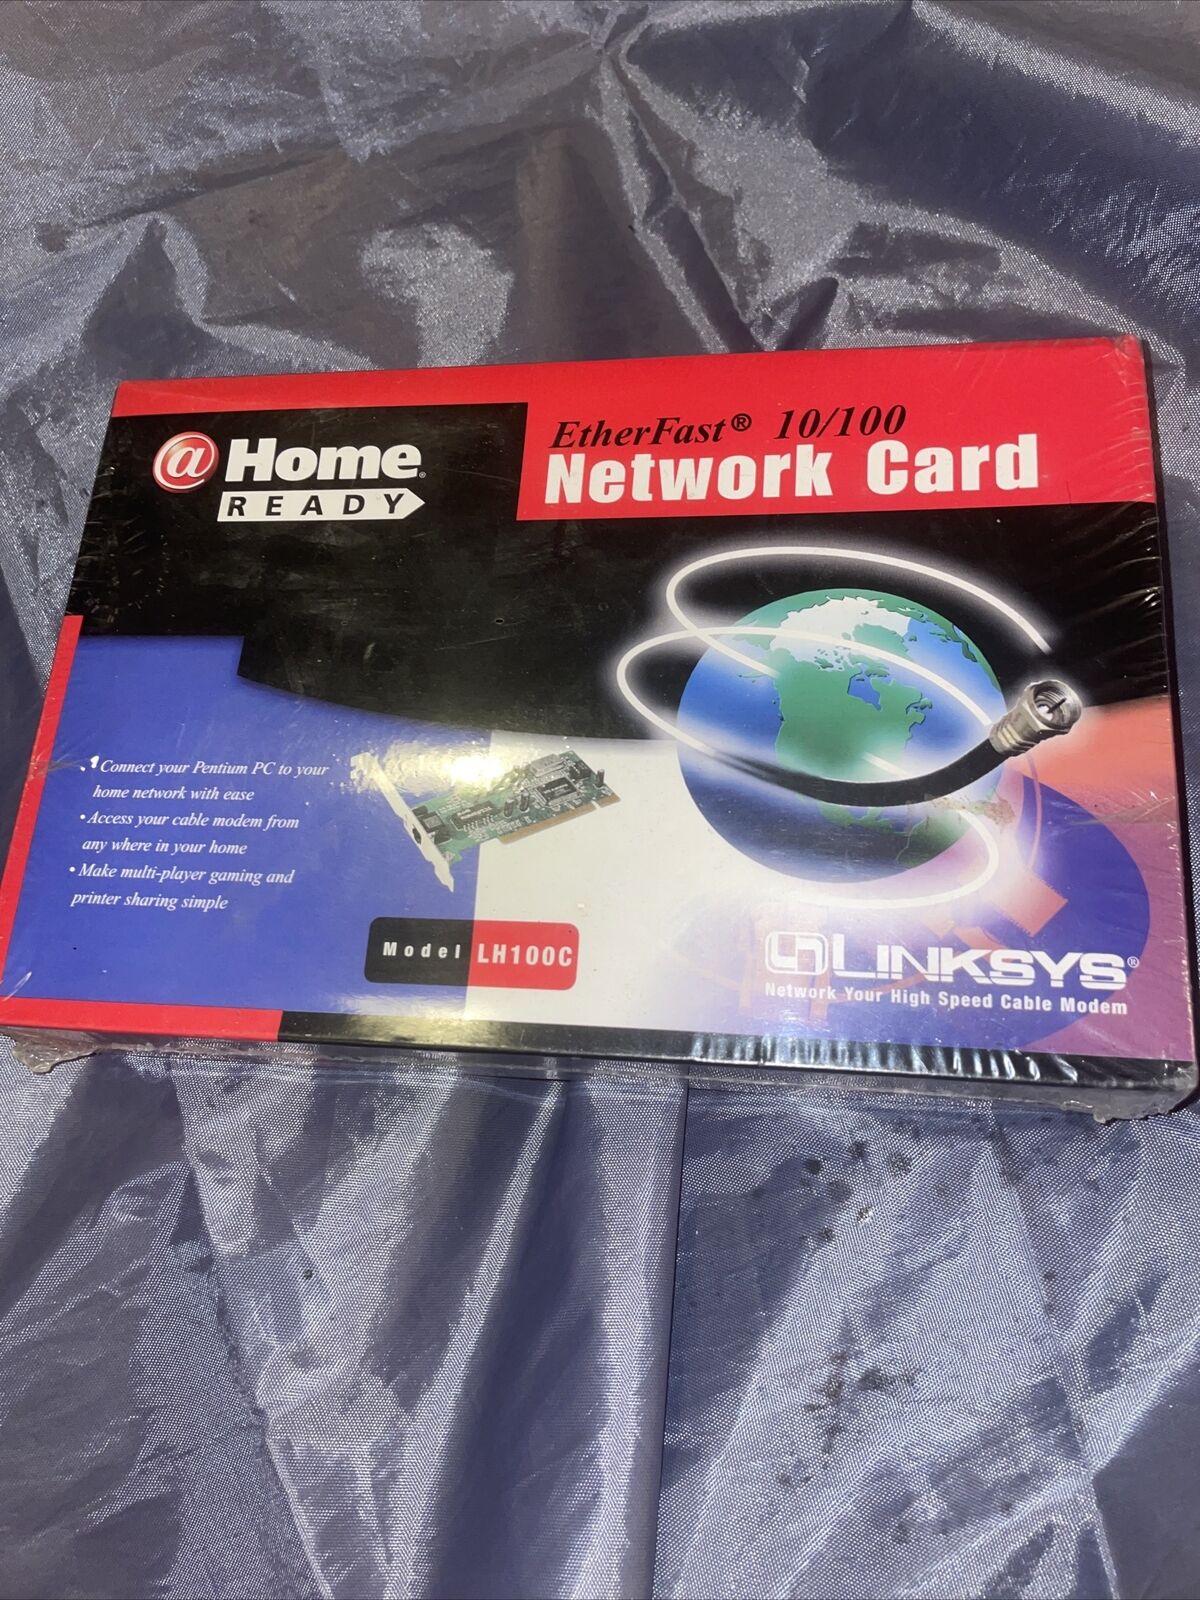 LINKSYS HOME READY  ETHERFAST 10/100 NETWORK CARD #LH100C